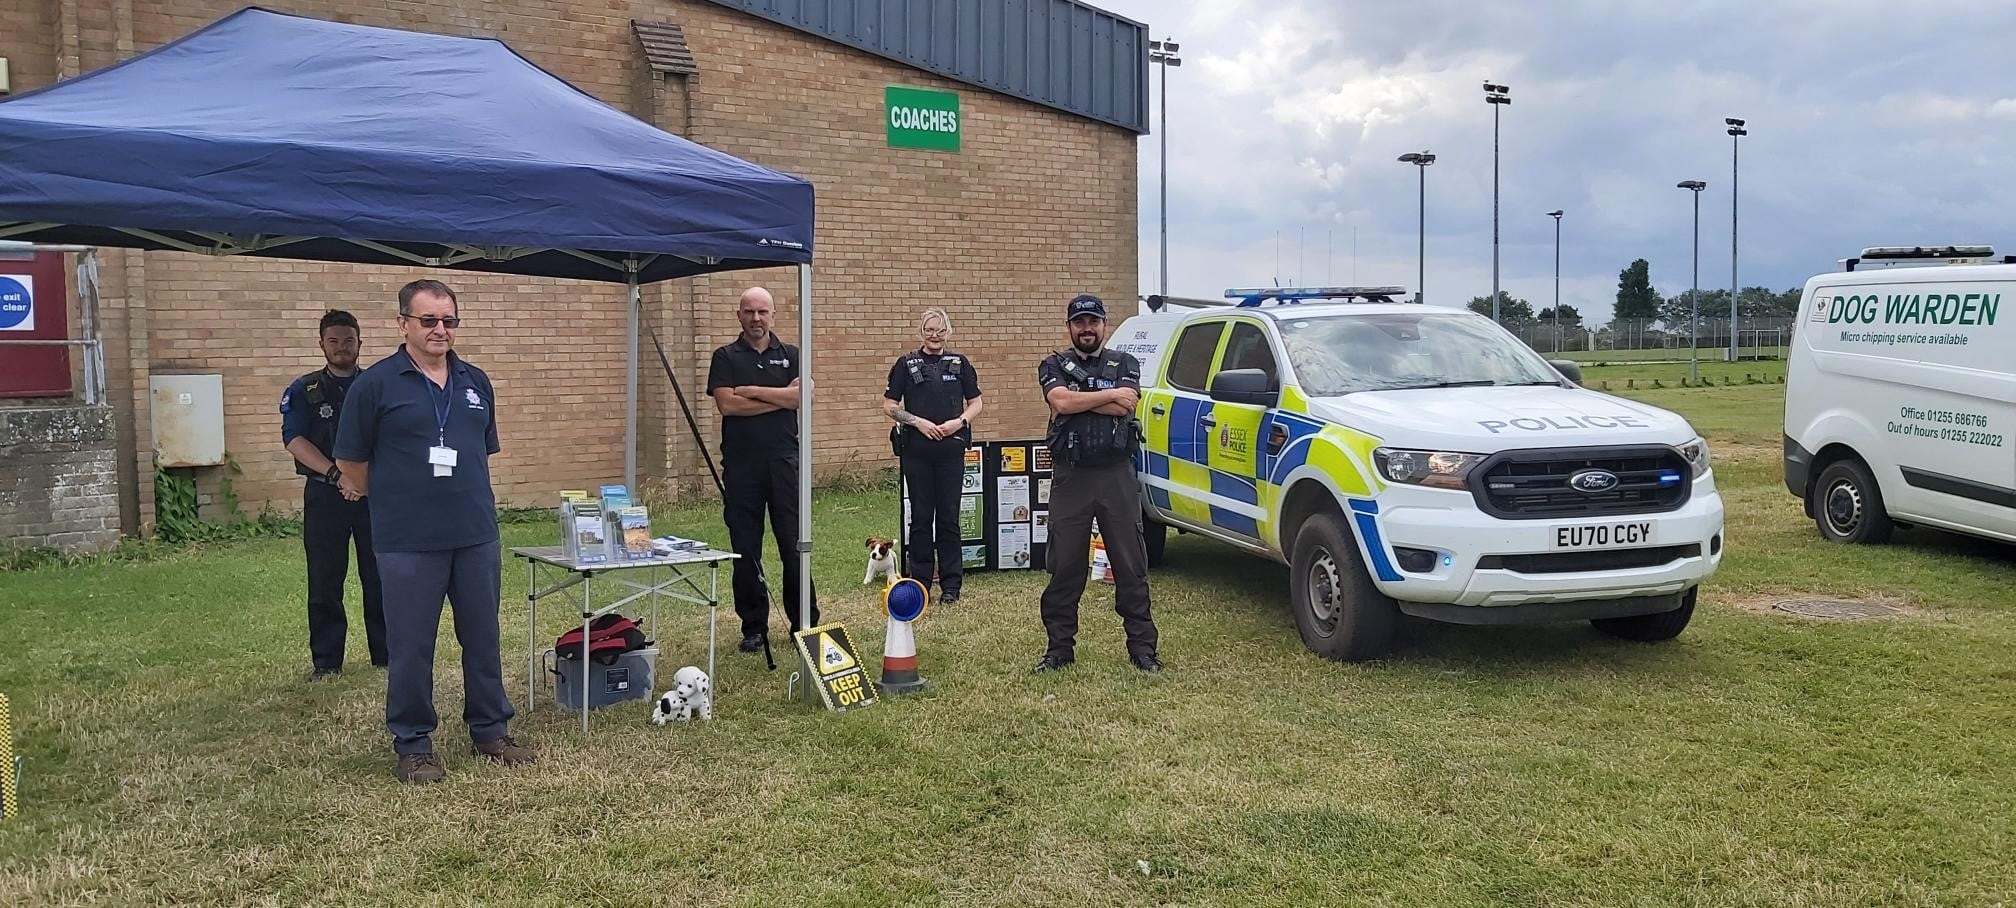 Dog advice - officers on hand at the dog advice event in Dovercourt 